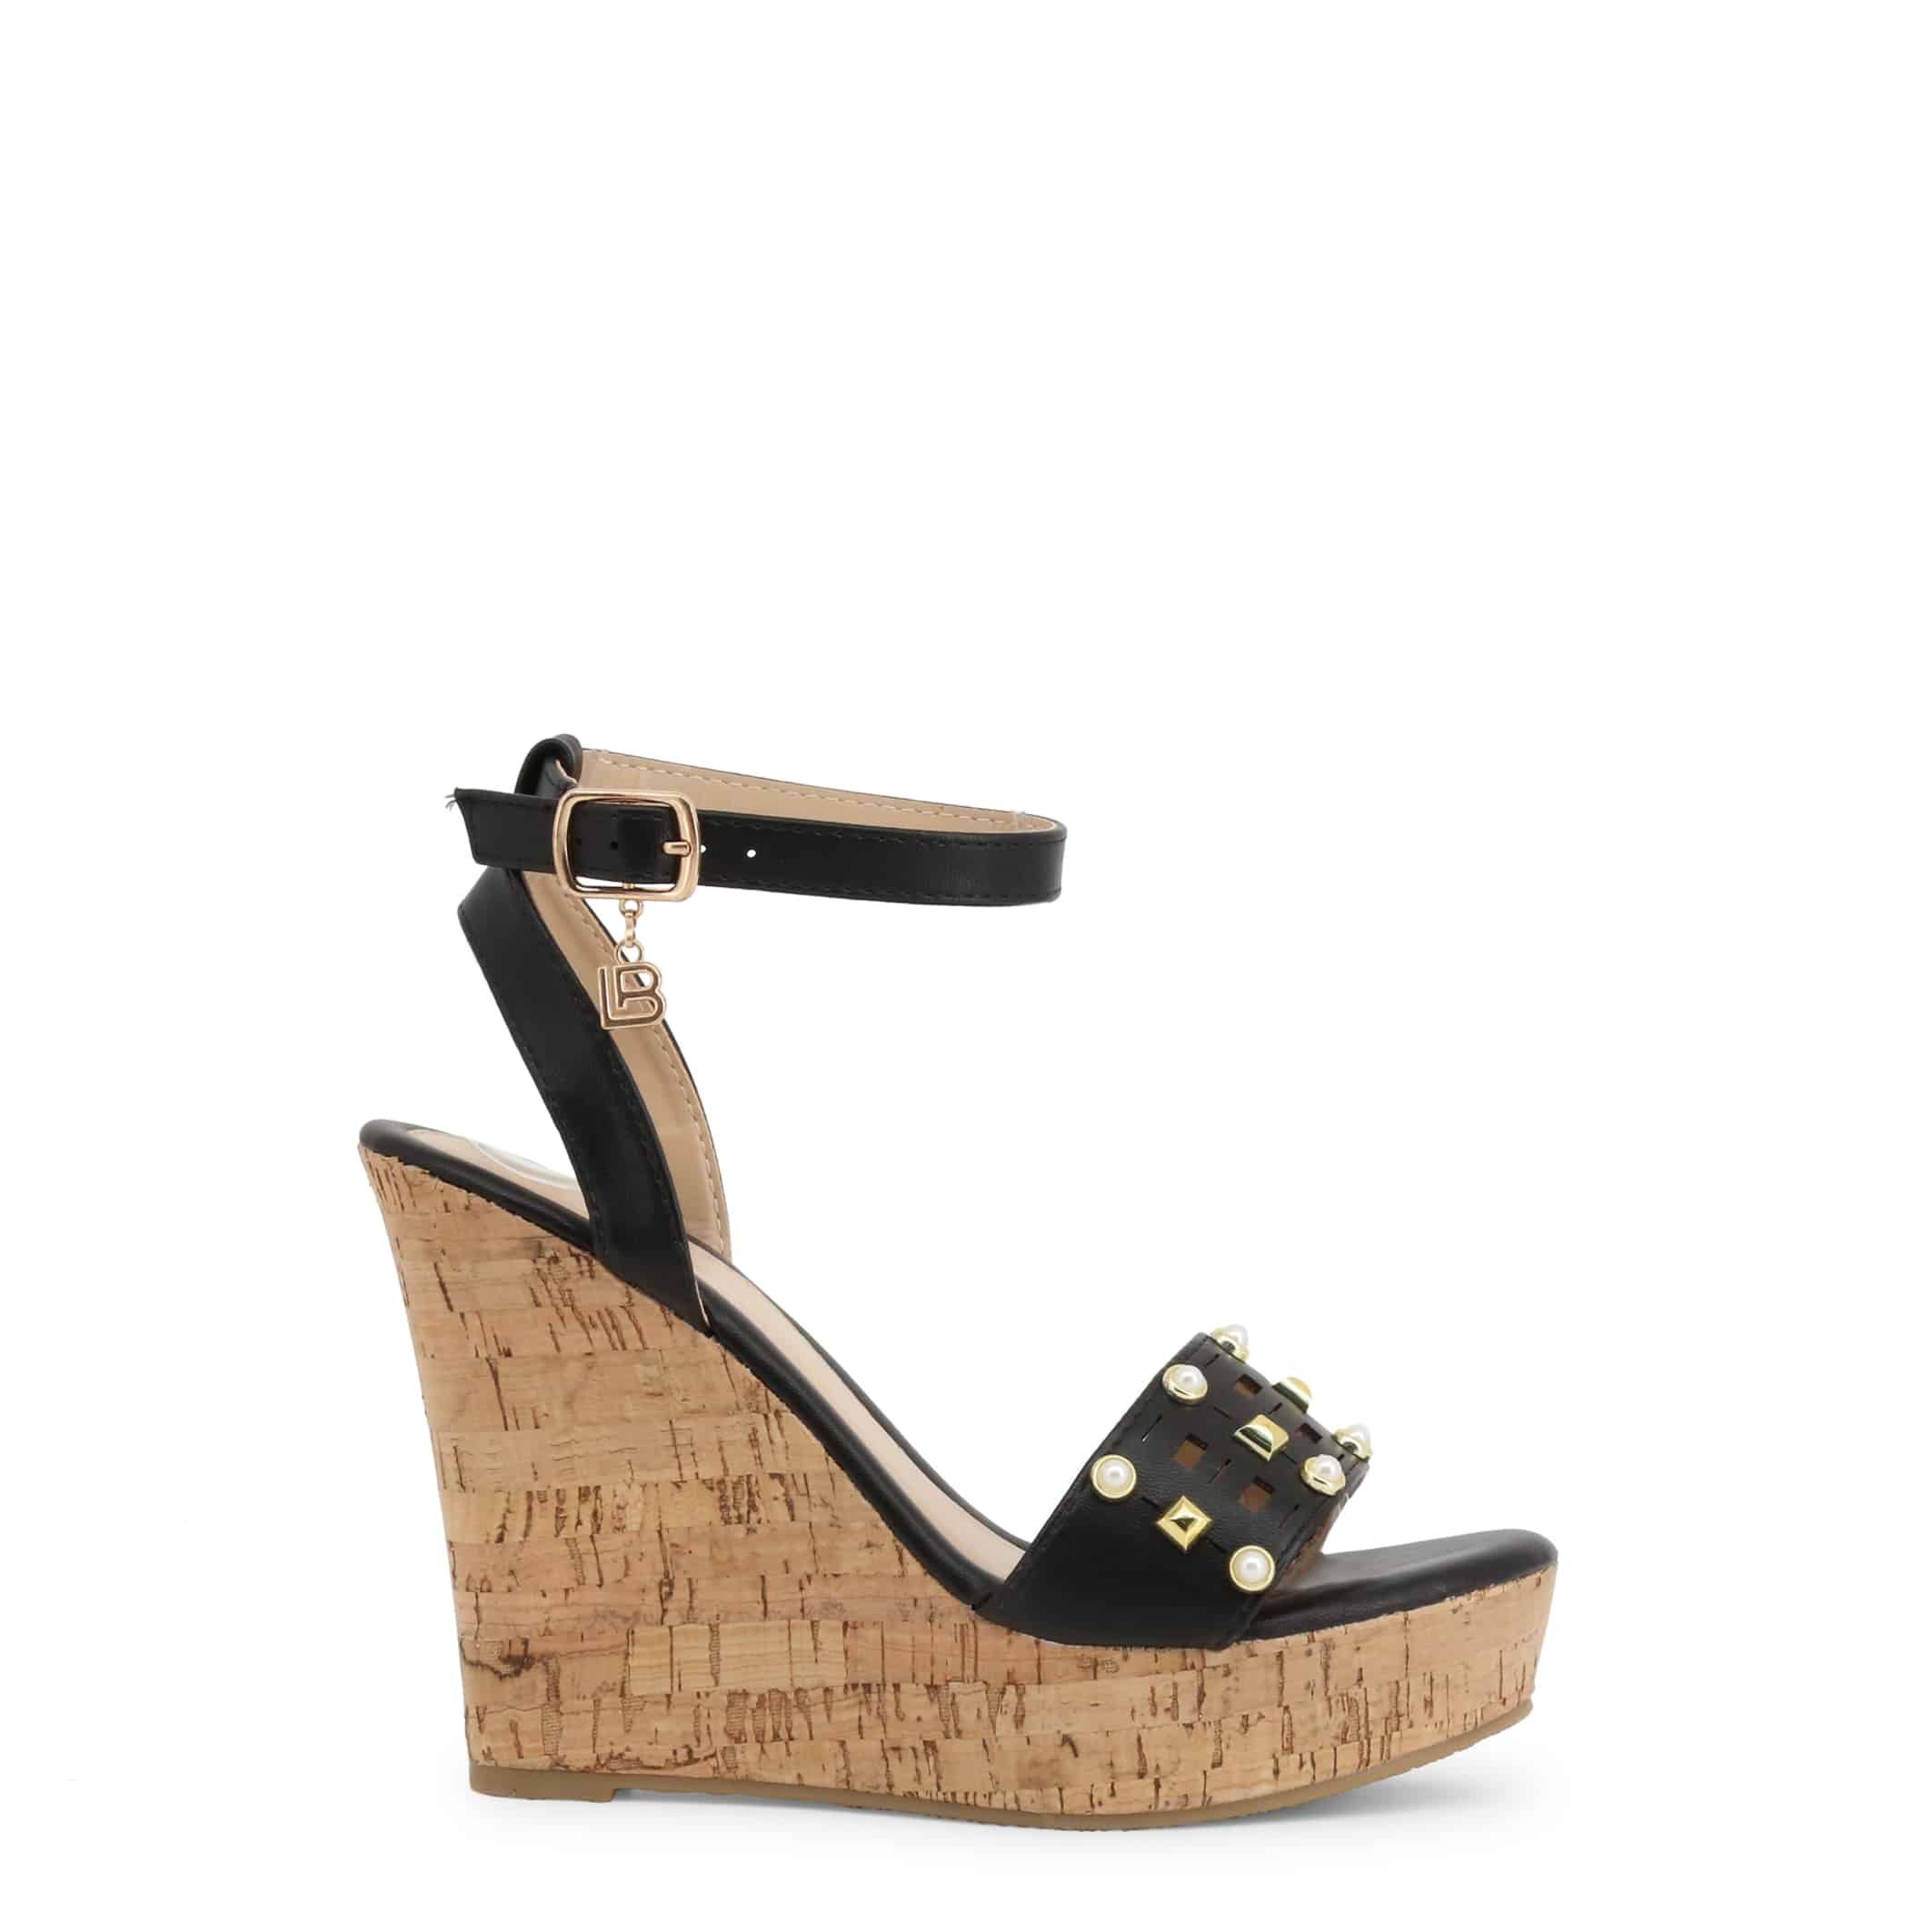 laura biagiotti shoes online